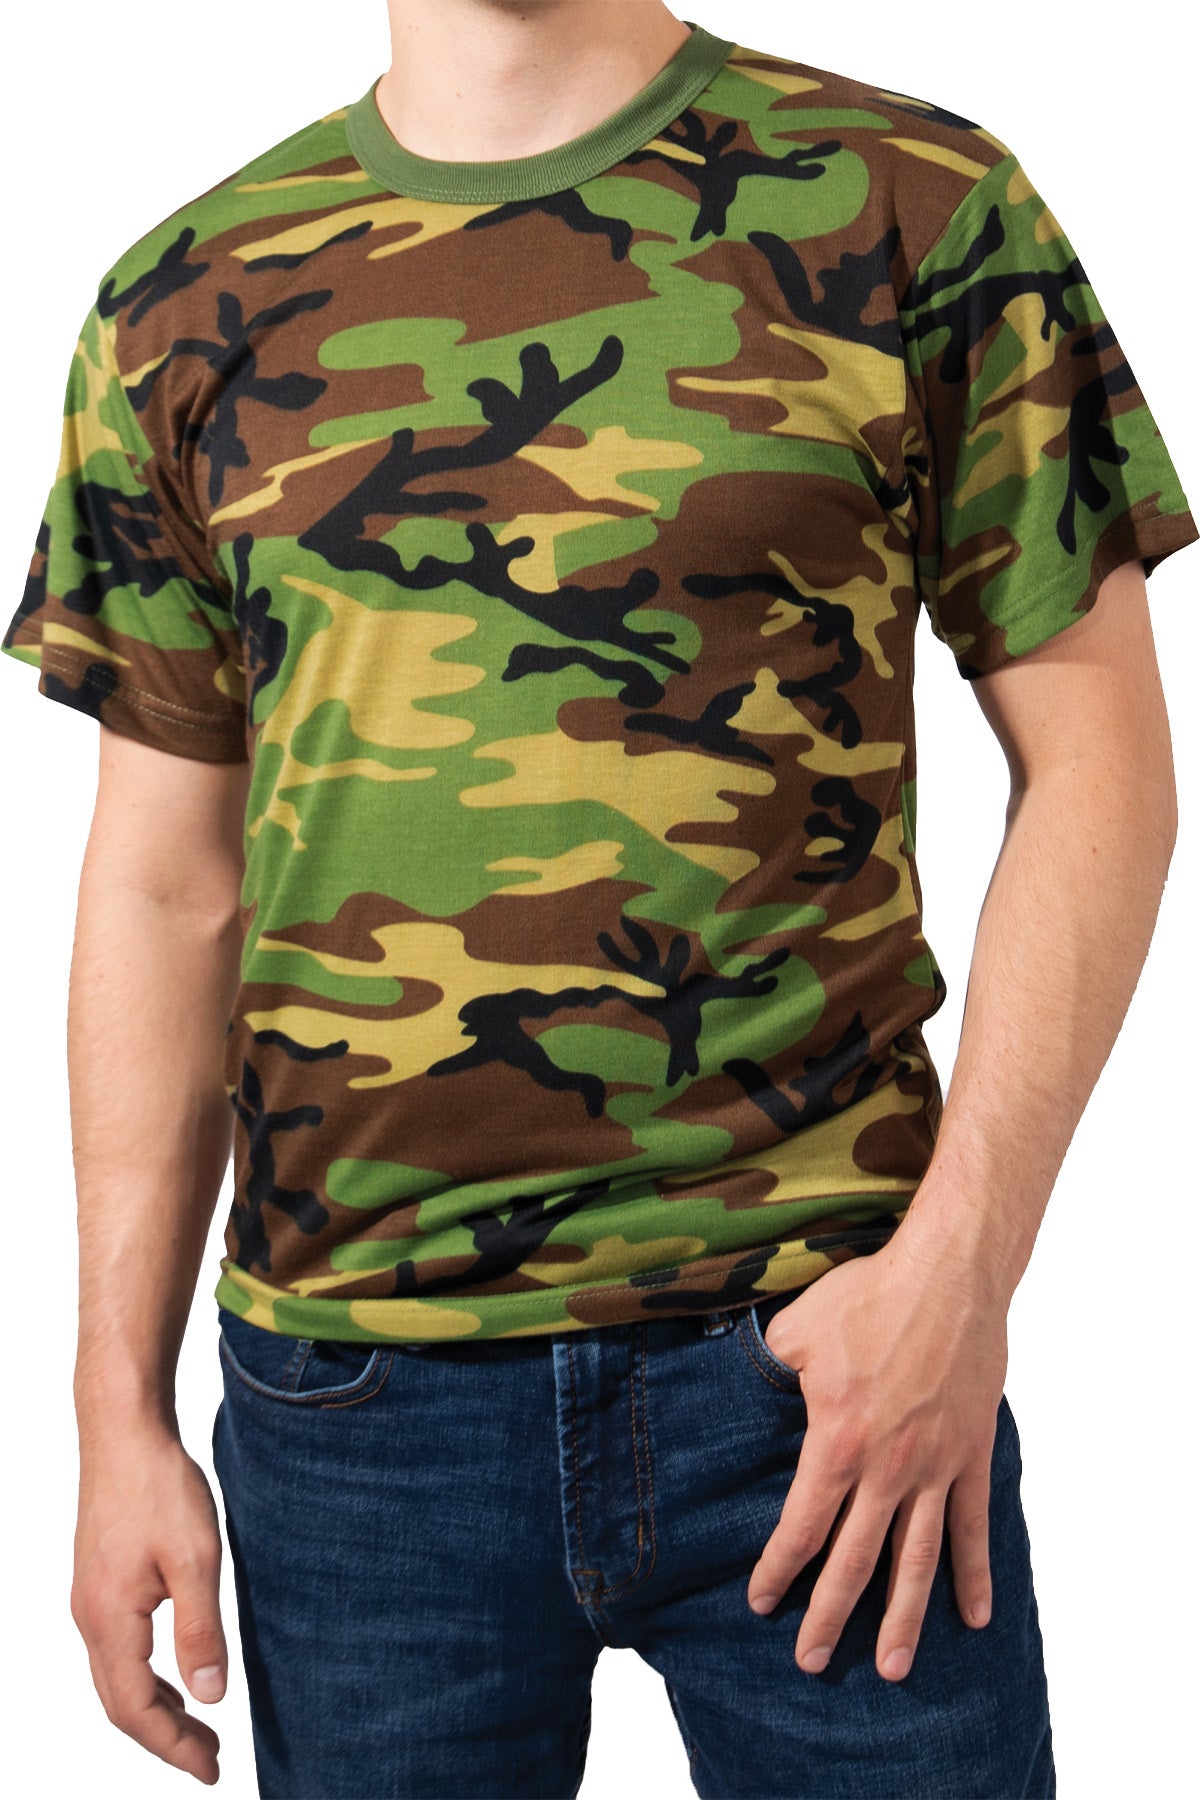 Woodland Camo - Moisture Wicking T-Shirts - Army Navy Store